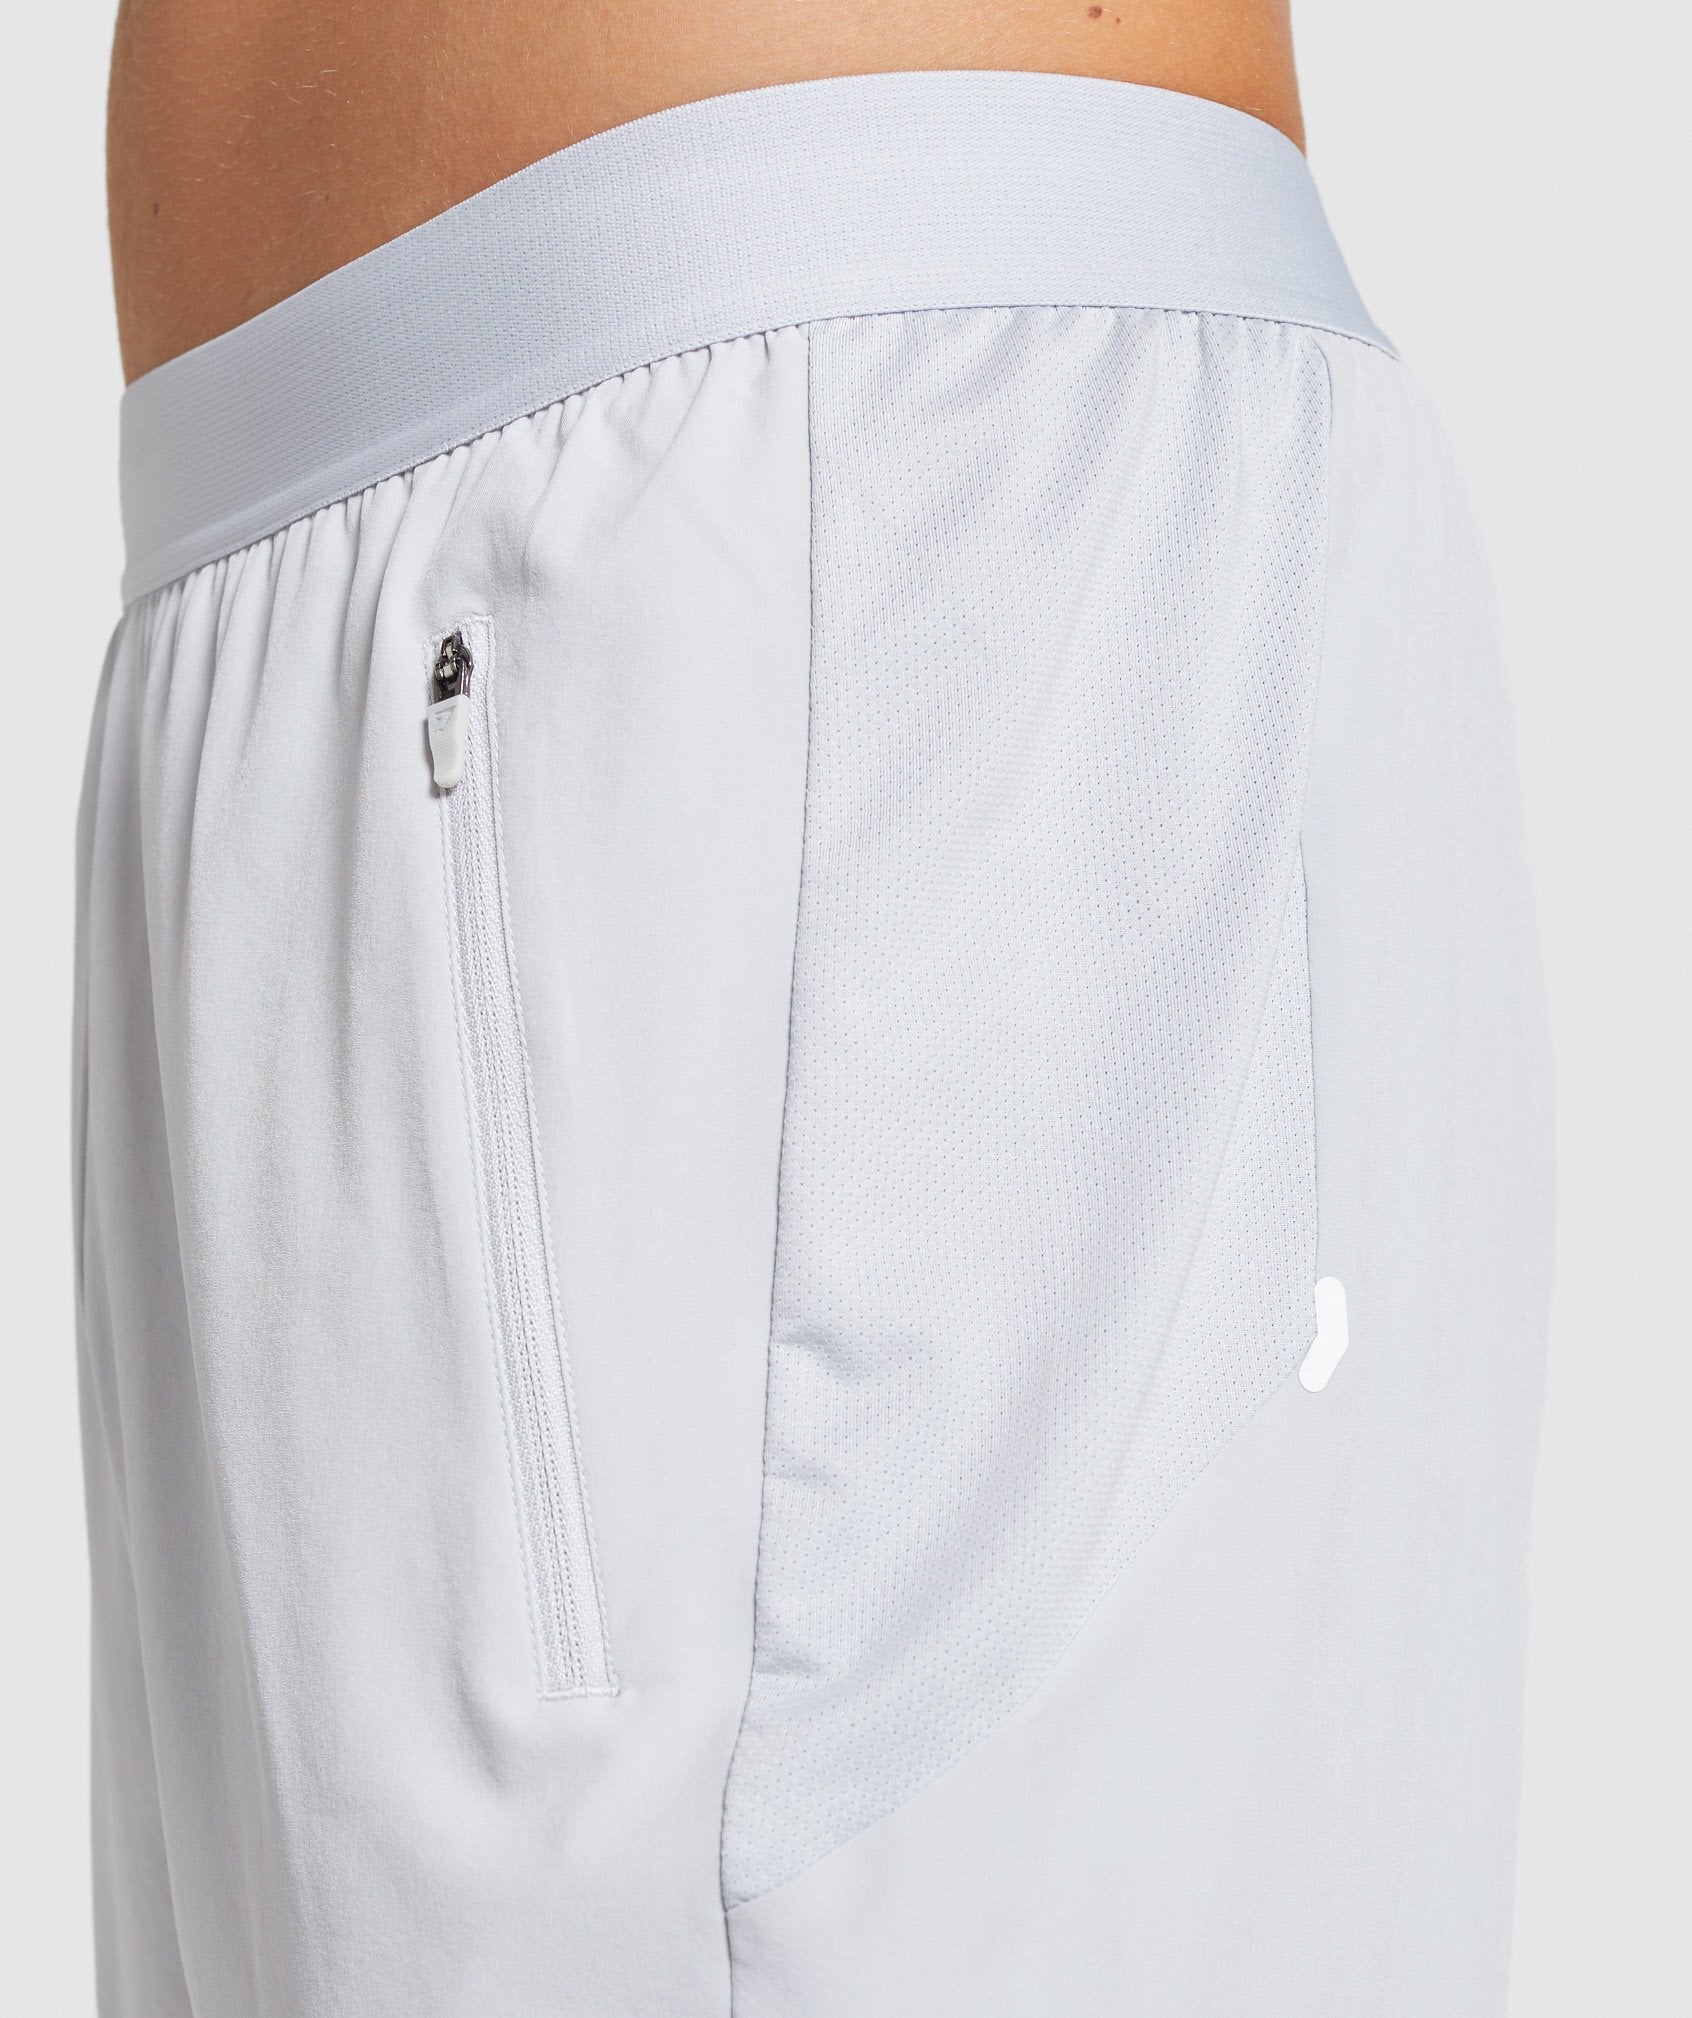 Element Hiit 2 in 1 Shorts in Grey - view 5